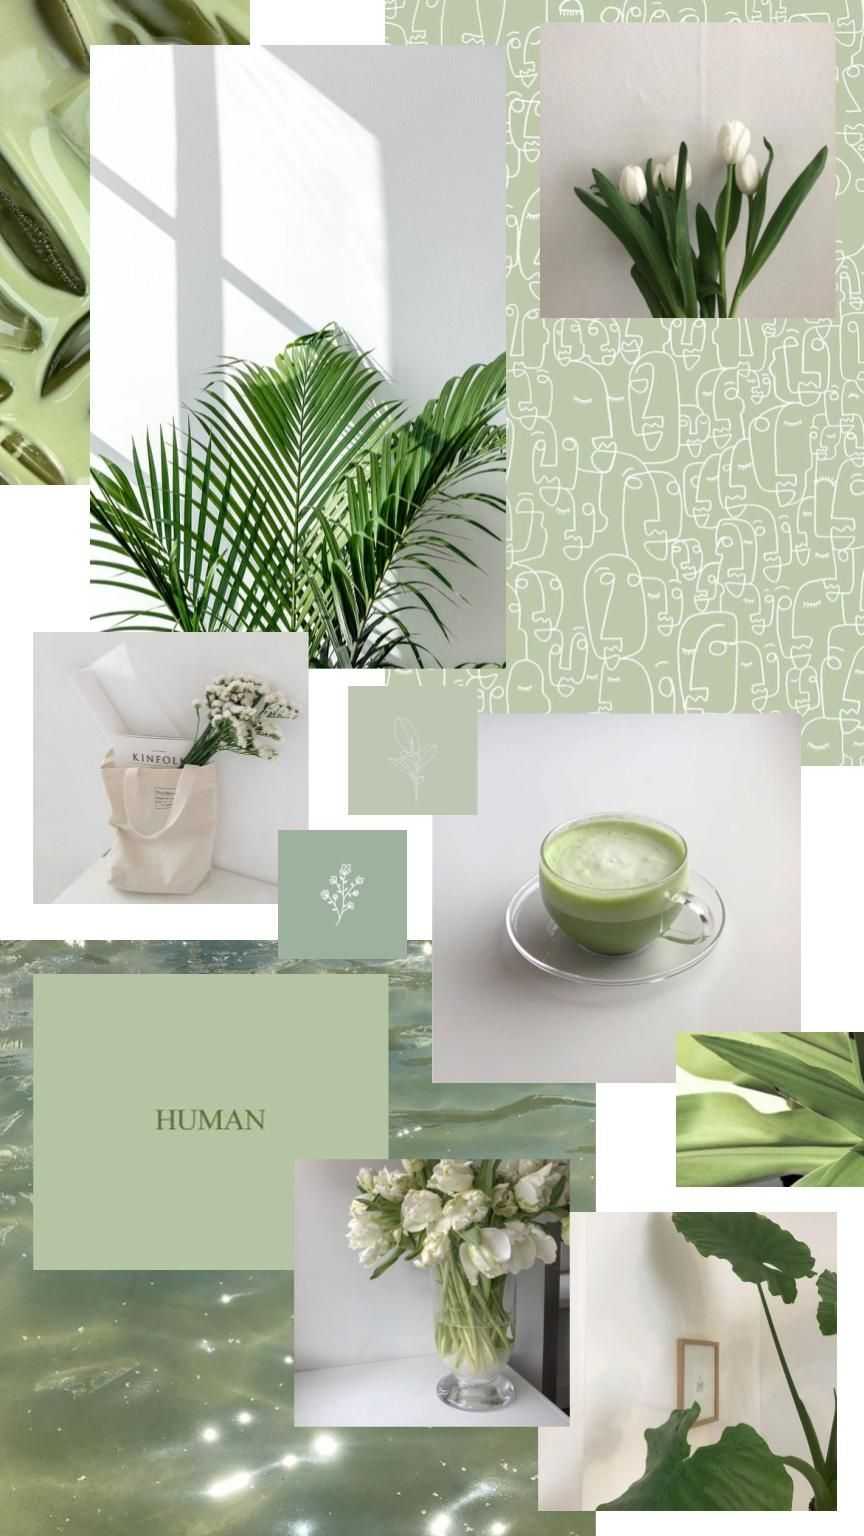 A collage of green aesthetic images - Pastel green, sage green, soft green, green, light green, neon green